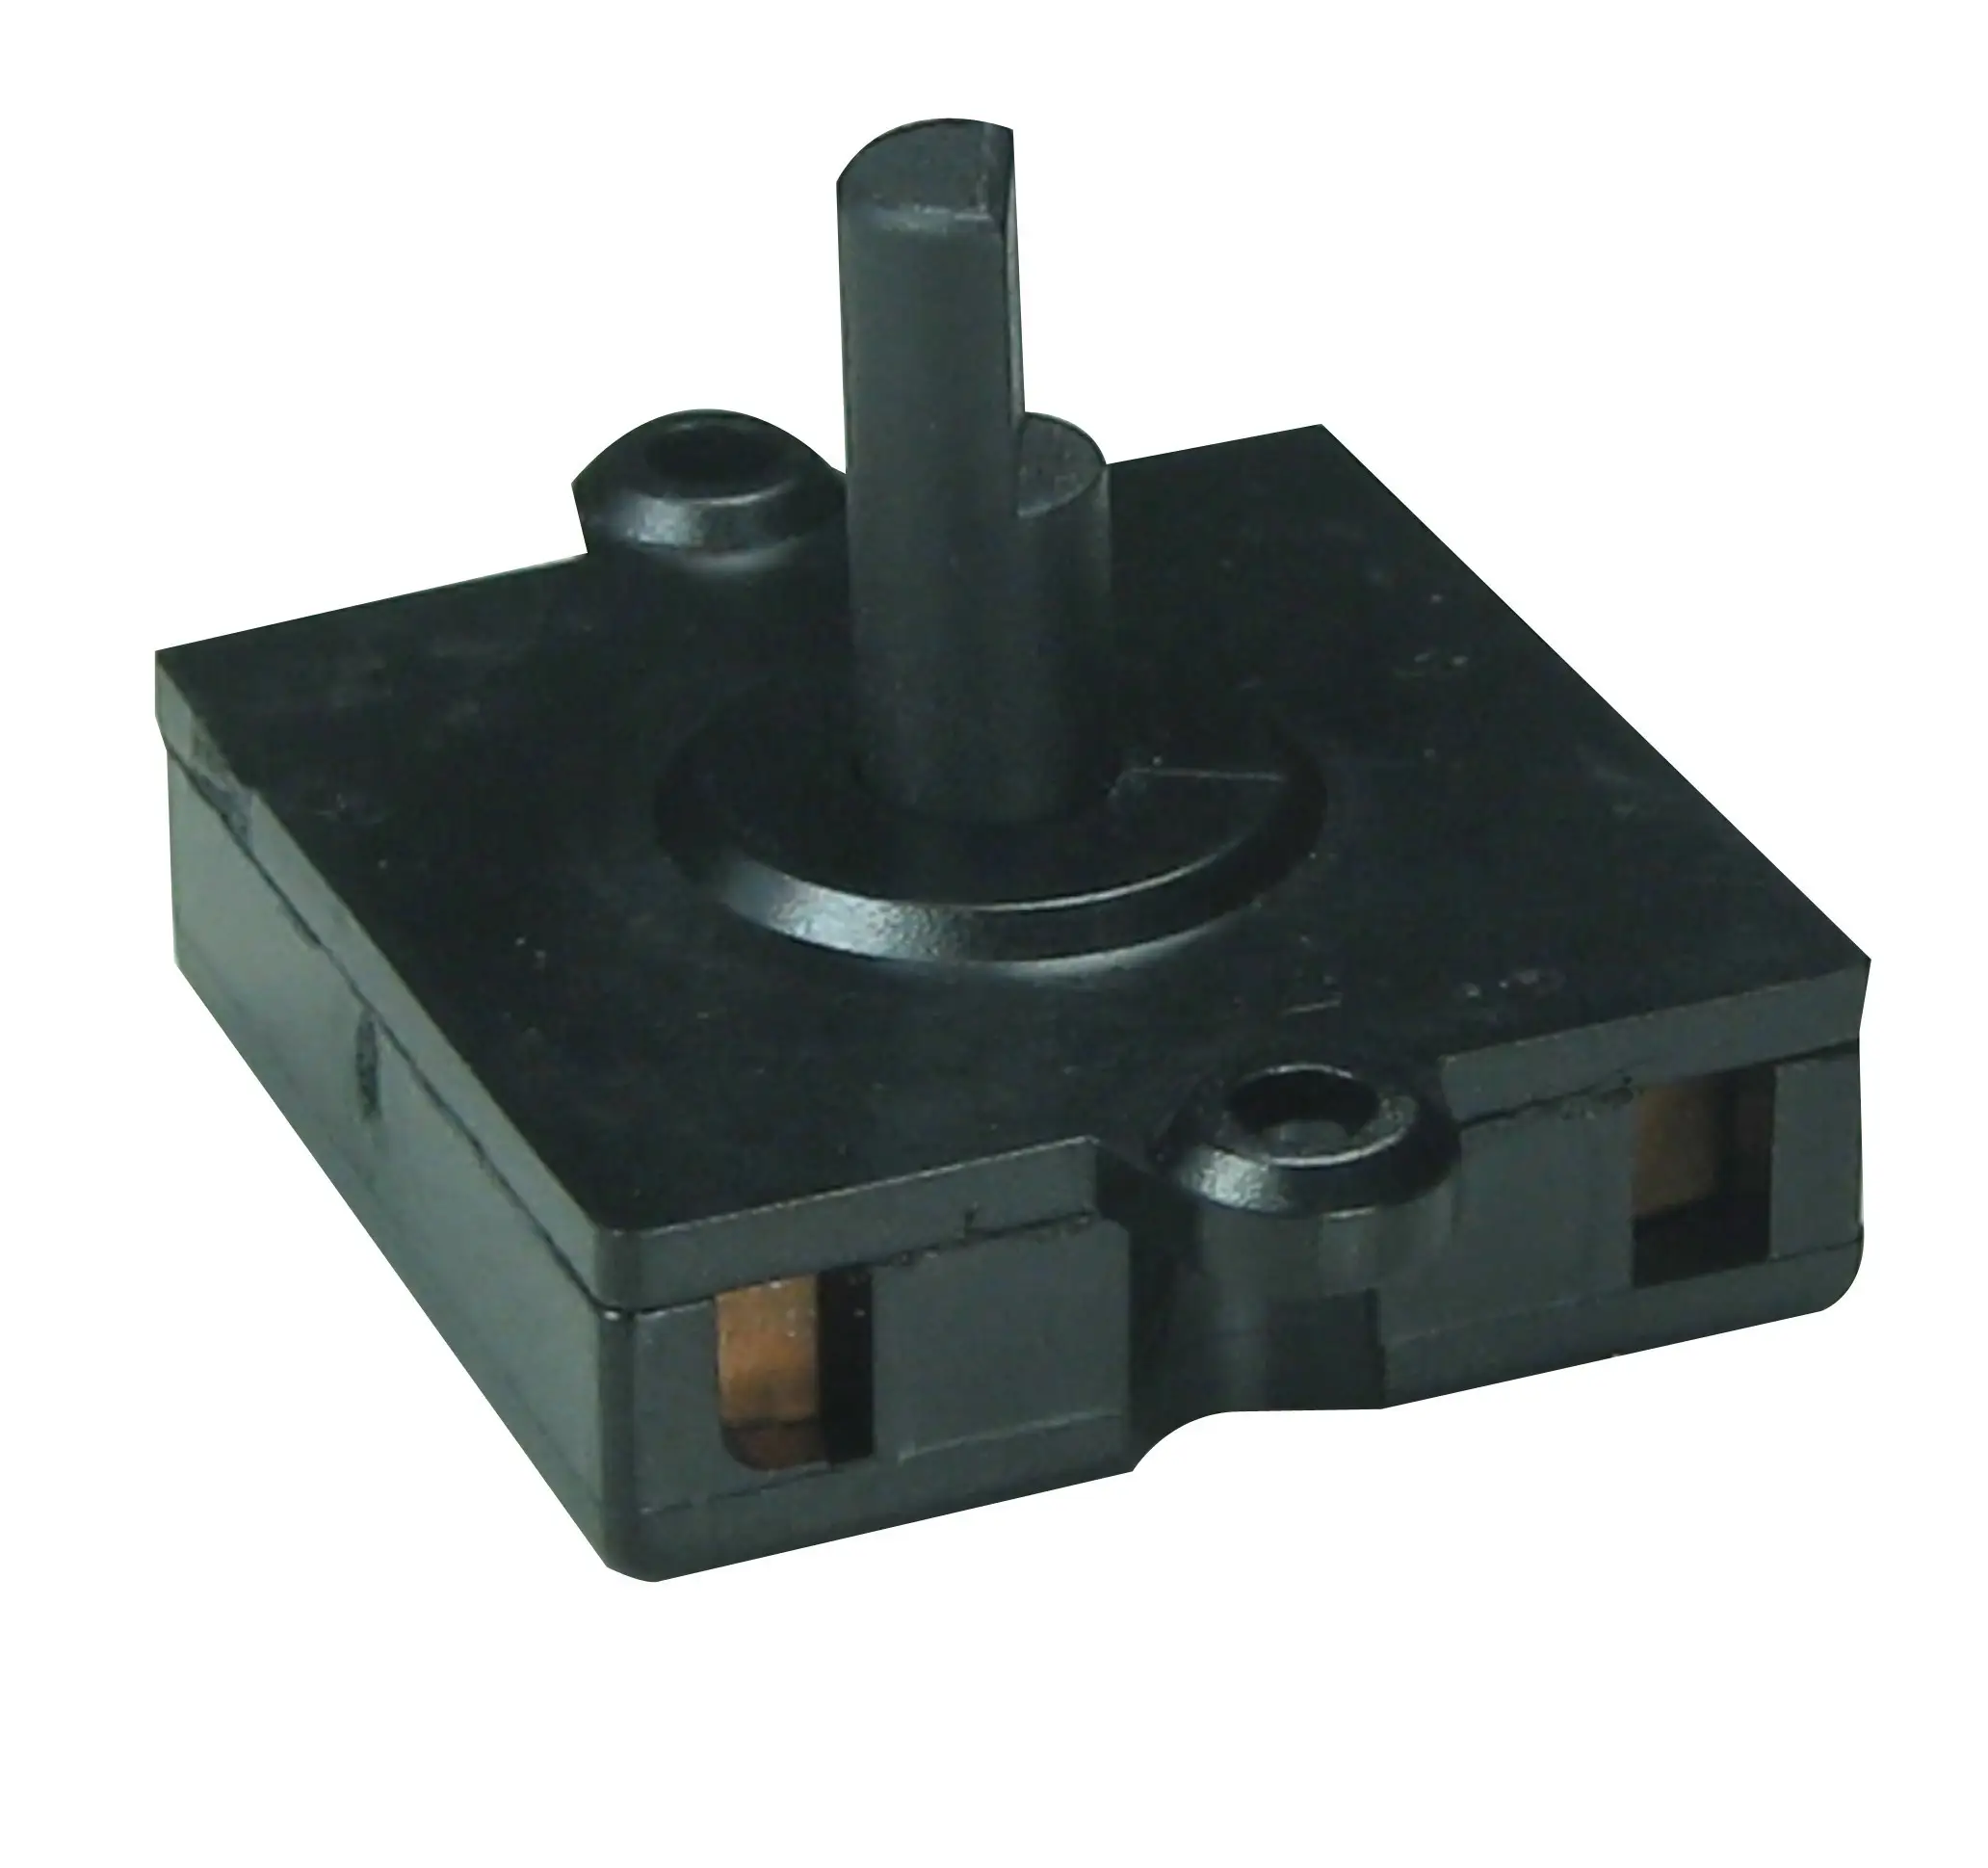 Single pole 2,3,4 speed fan select rotary Switch,manufacturer China